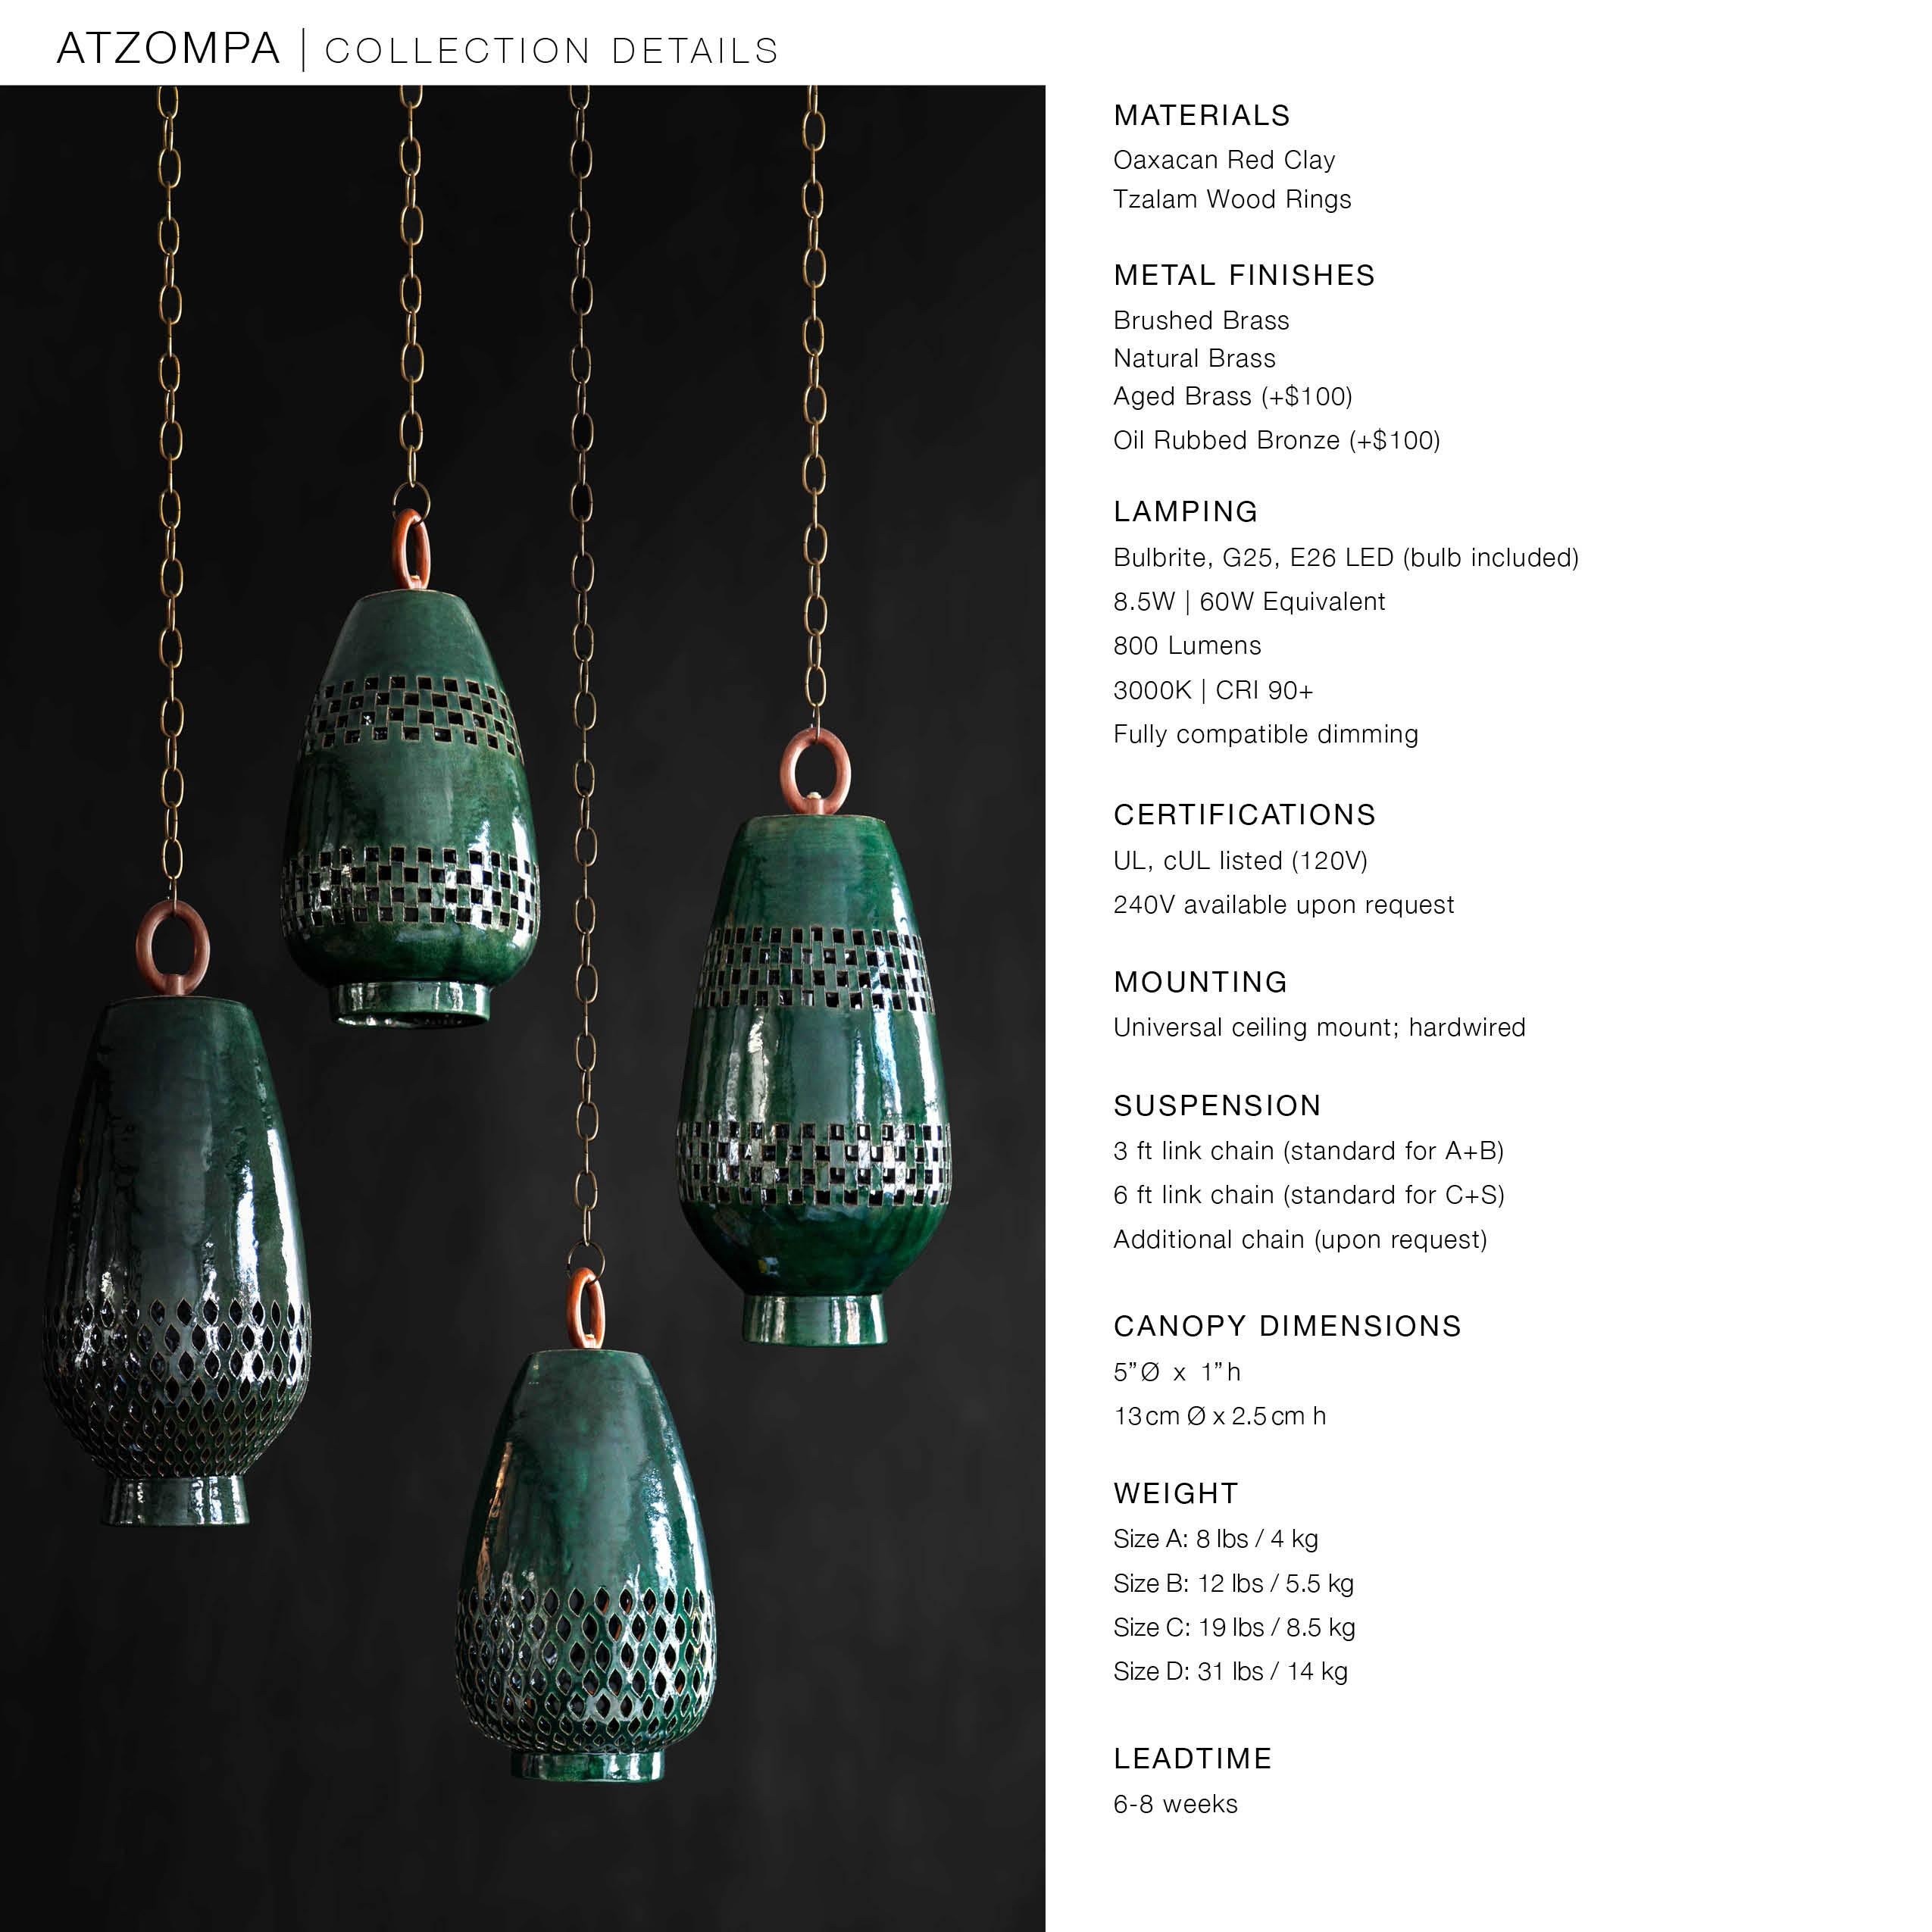 Hand-Crafted Large Emerald Ceramic Pendant Light, Brushed Brass, Ajedrez Atzompa Collection For Sale